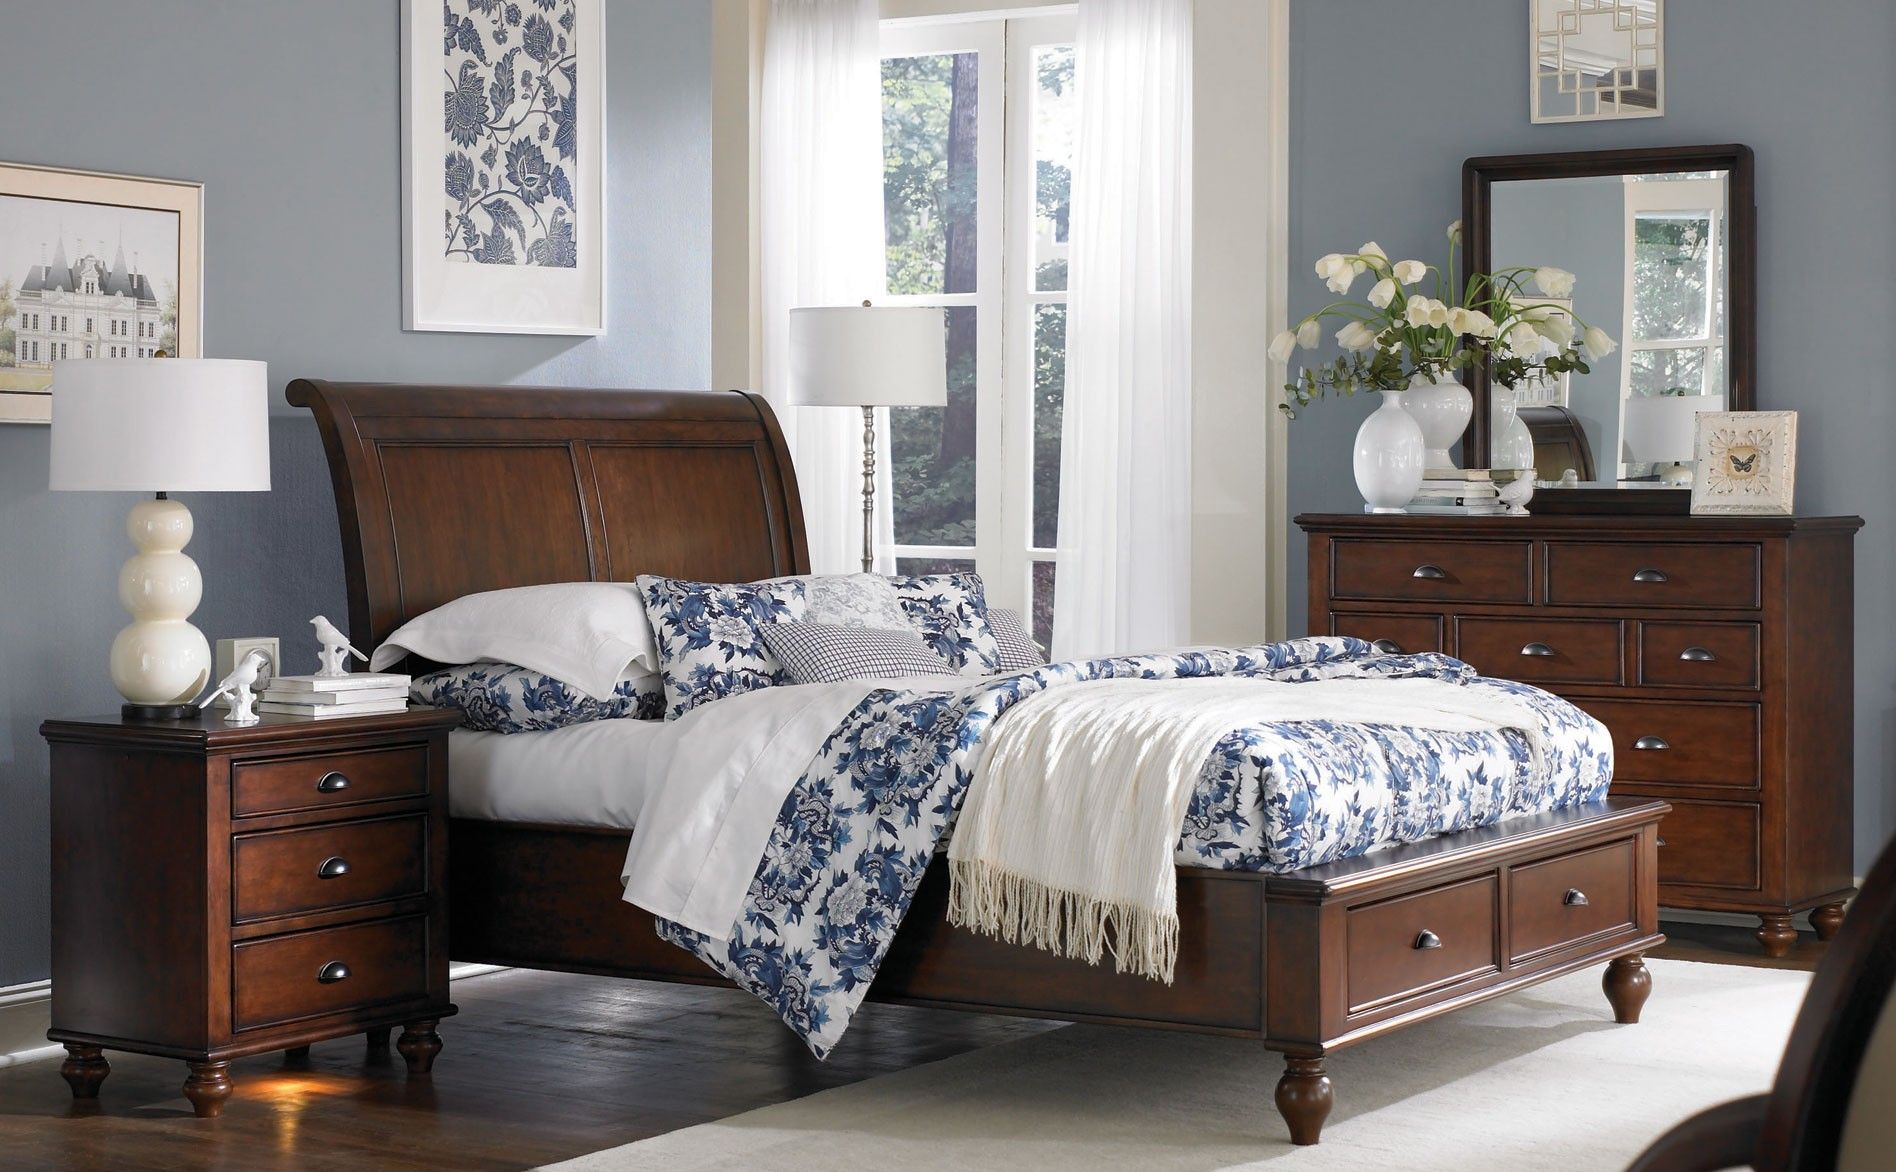 How to Style Cherry Wood Bedroom Furniture